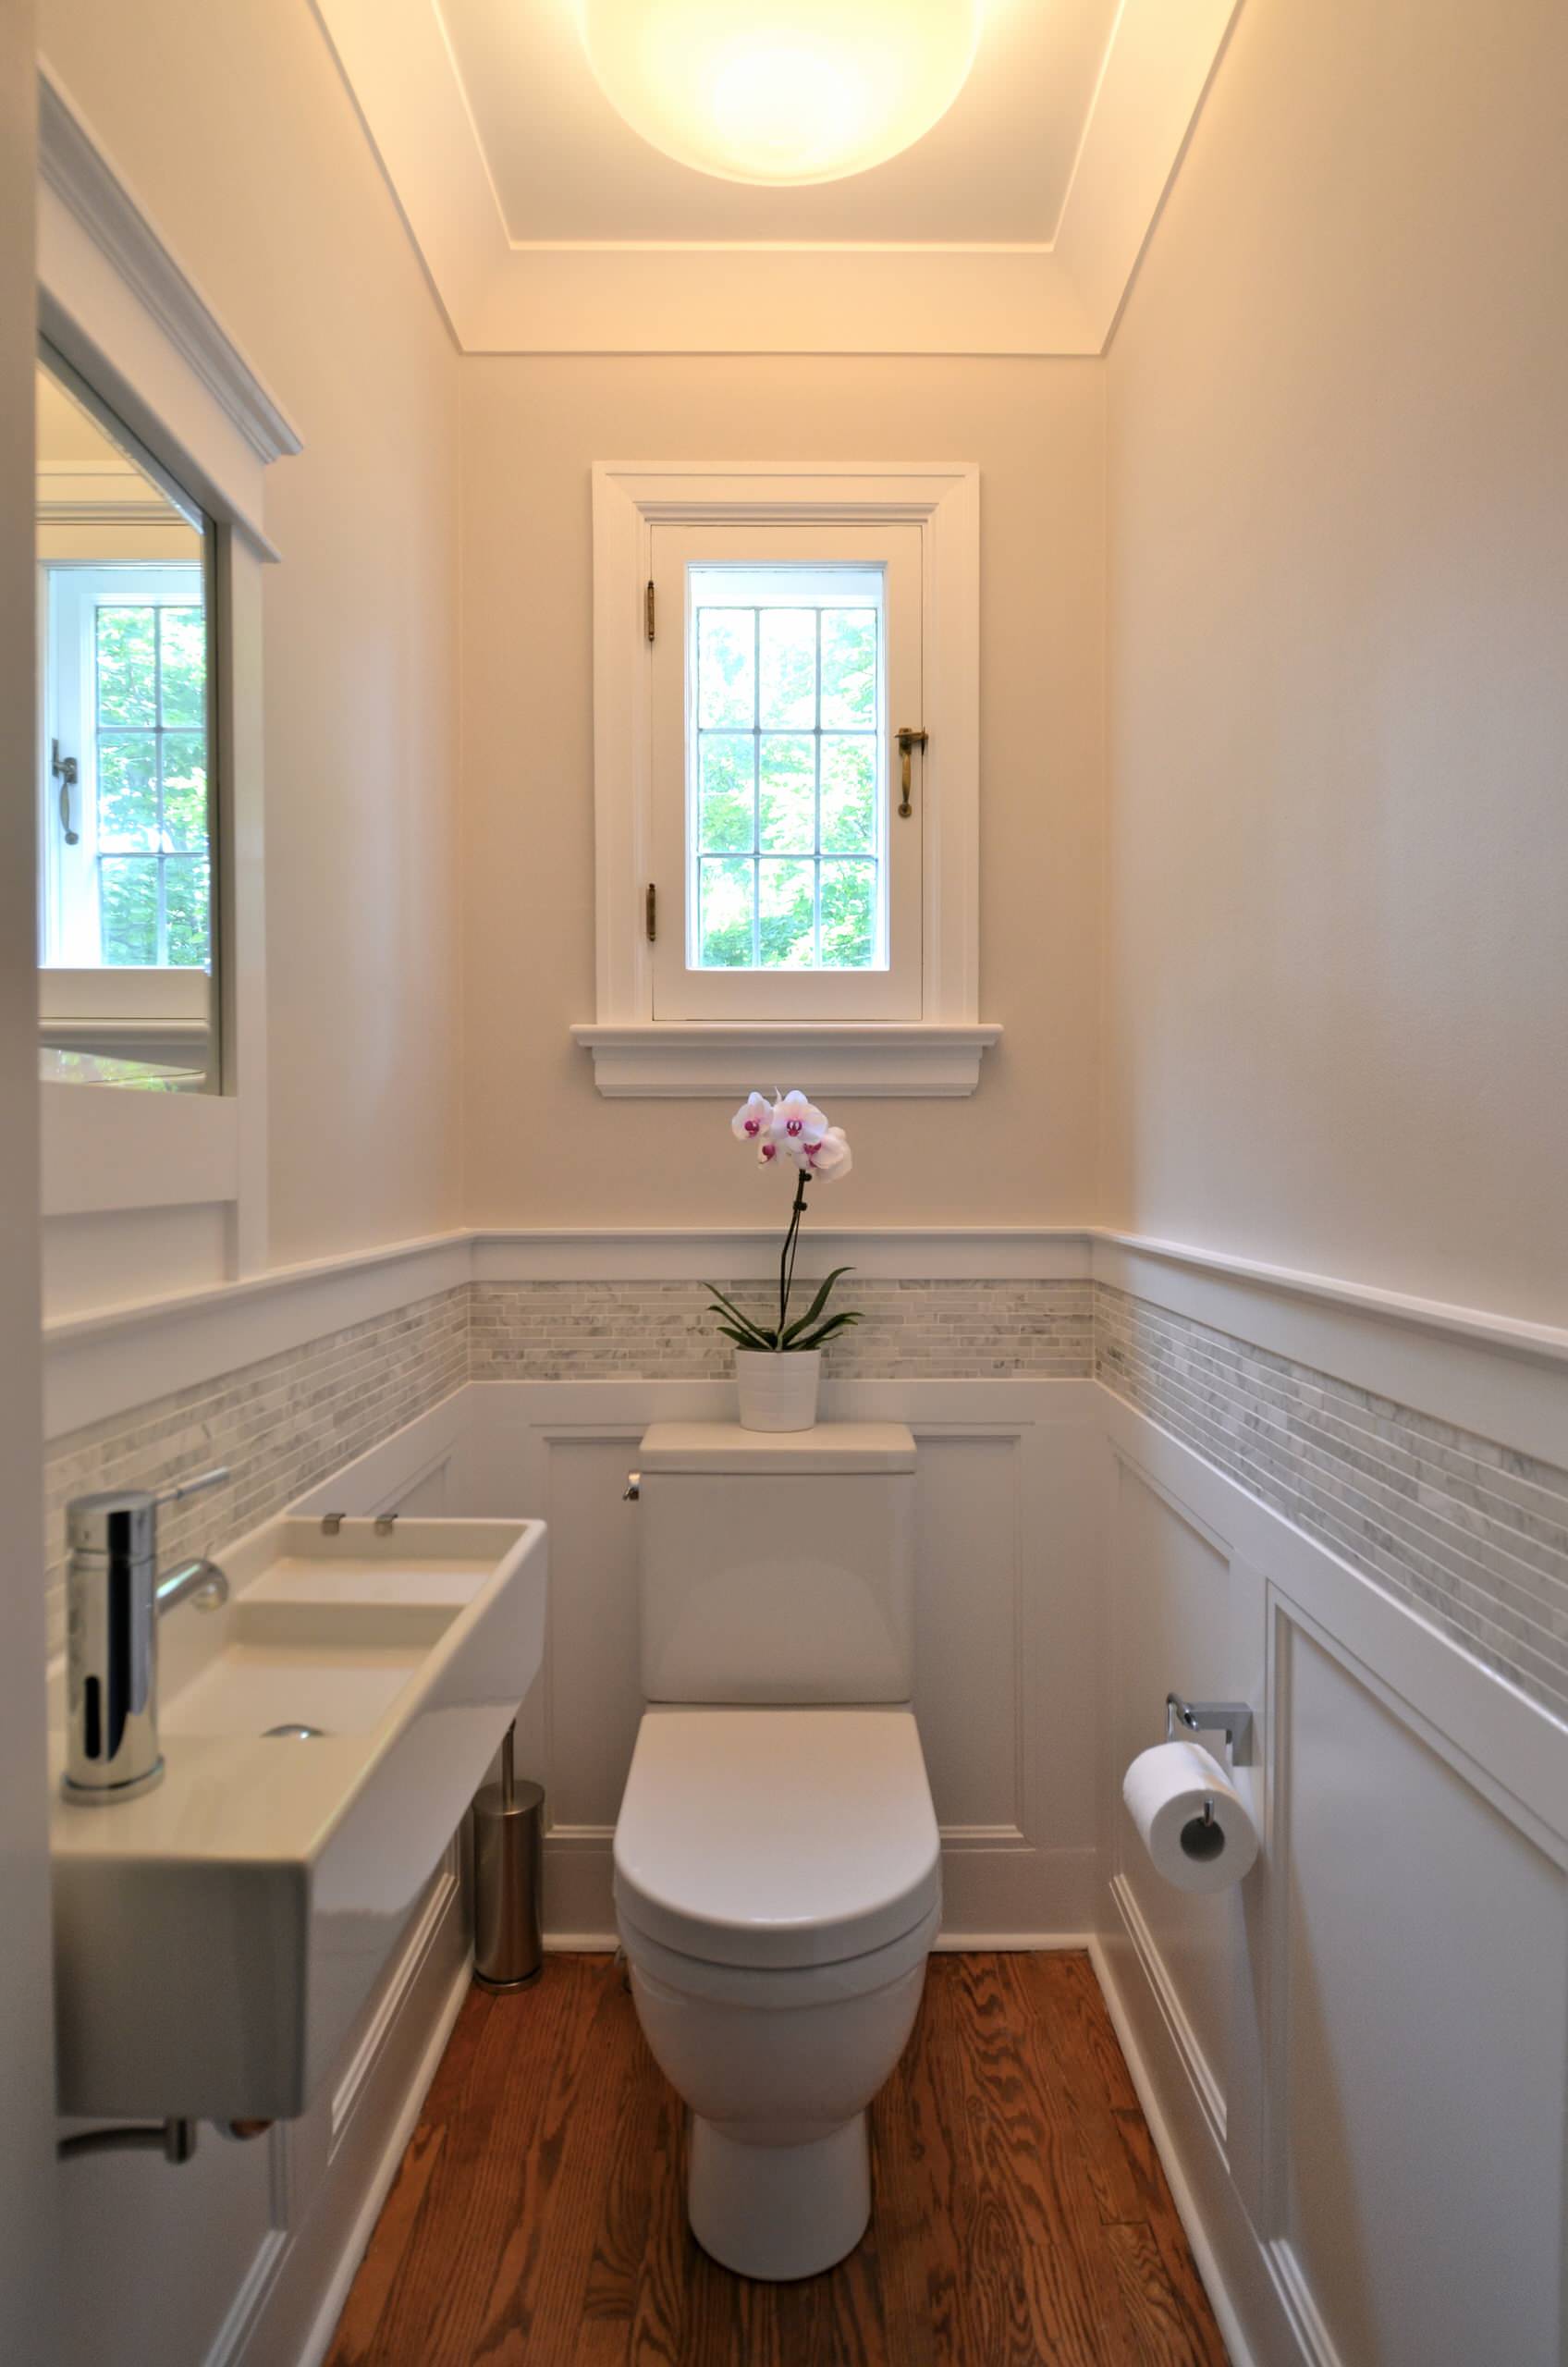 75 Beautiful Small Powder Room Pictures & Ideas | Houzz